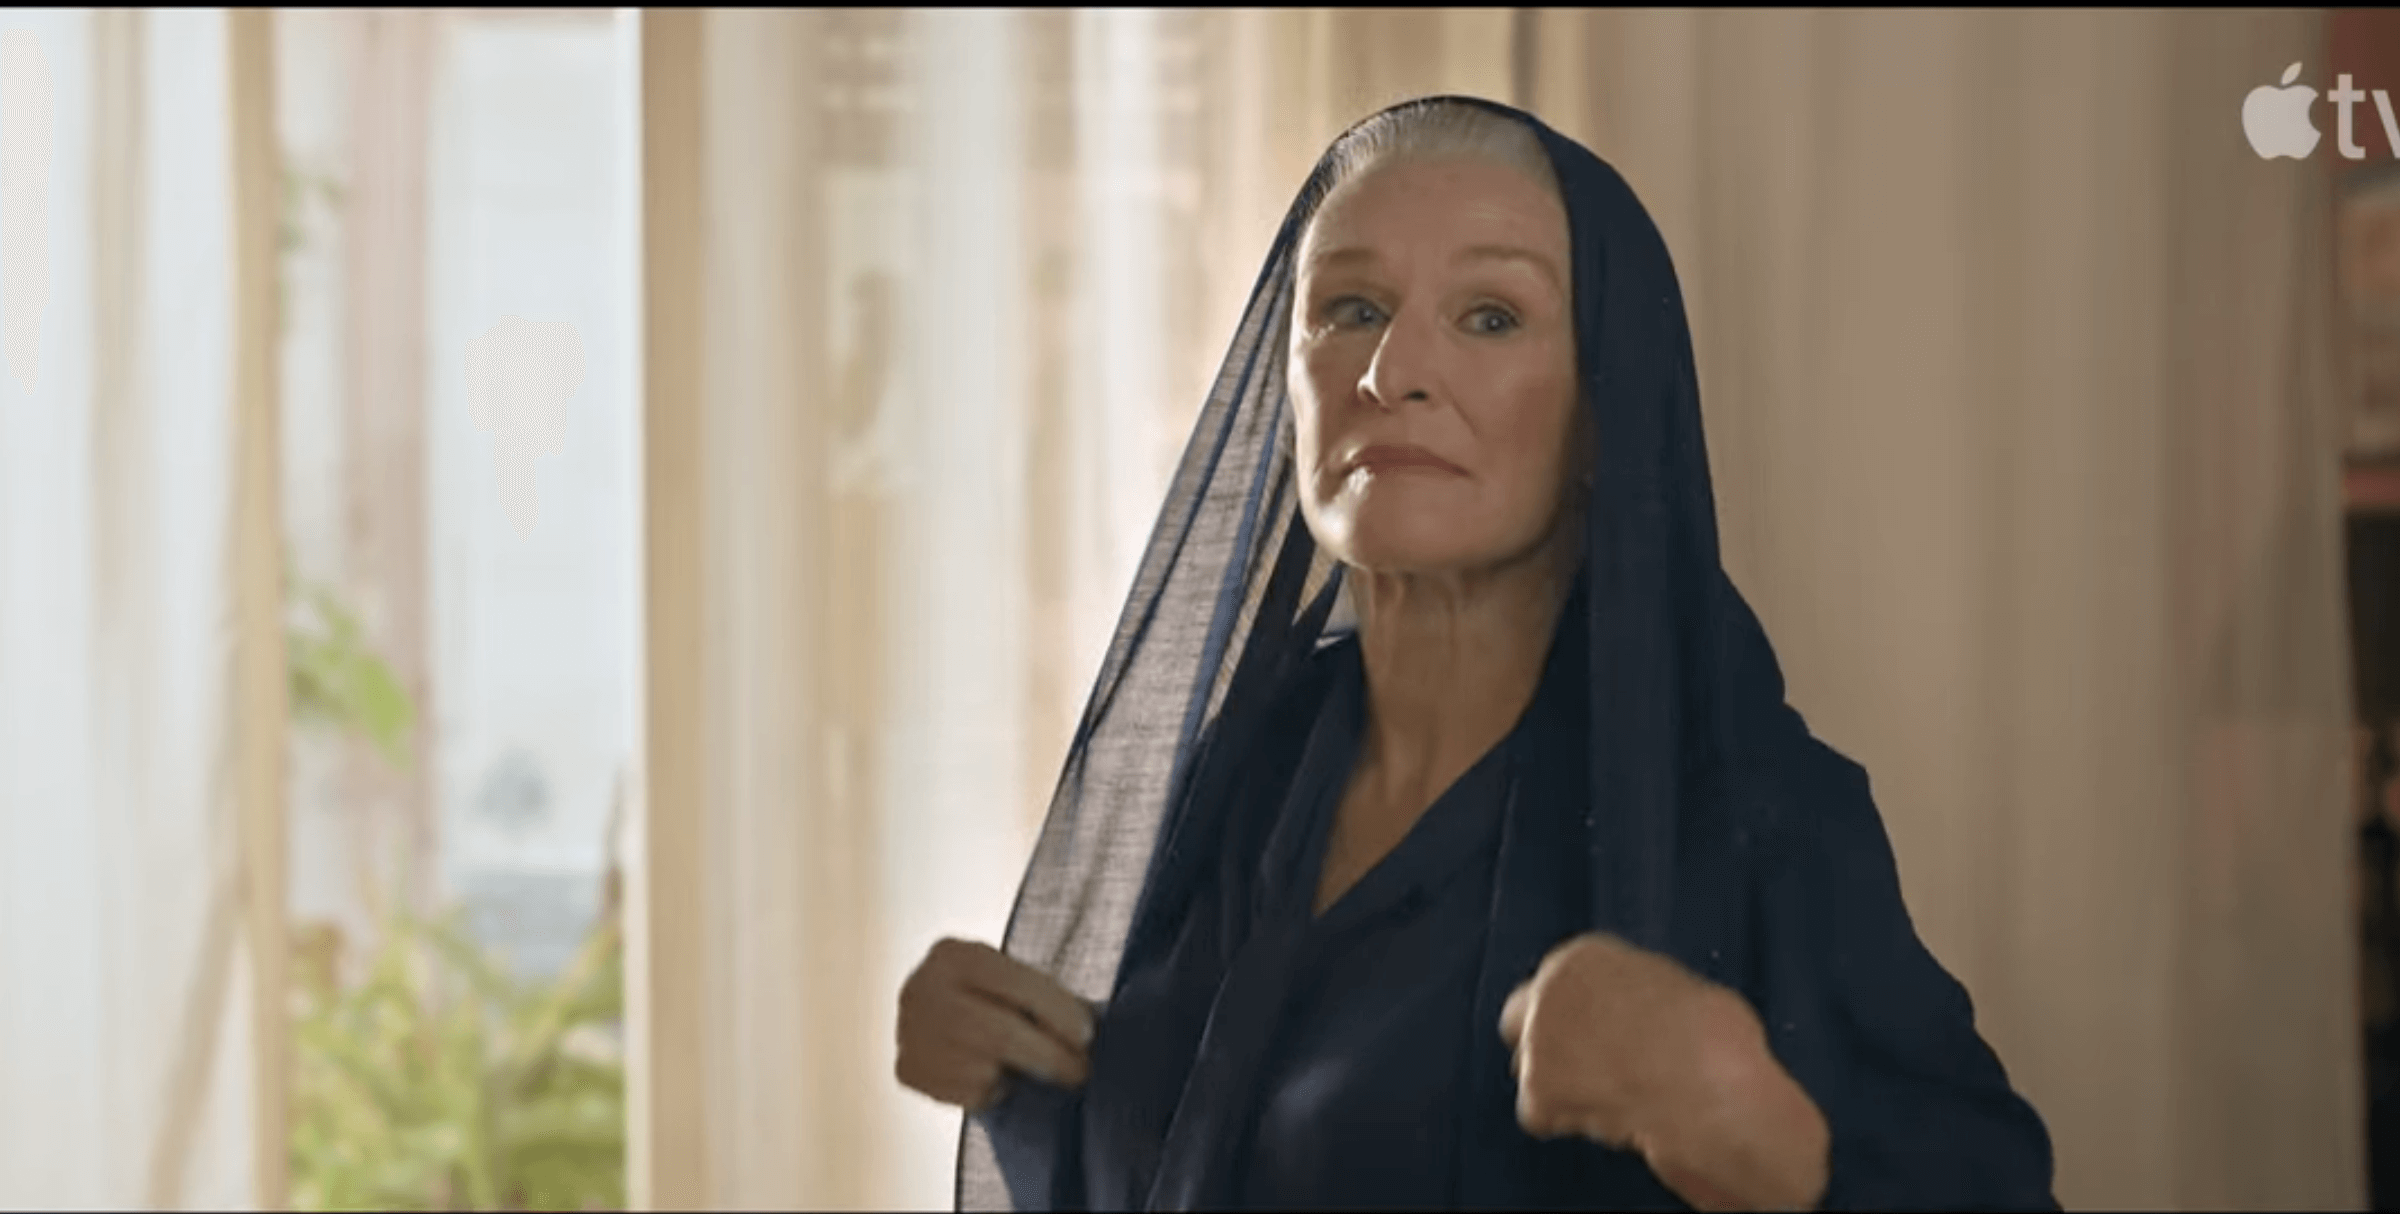 Glenn Close in “Tehran” looking distinctly out-of-place.